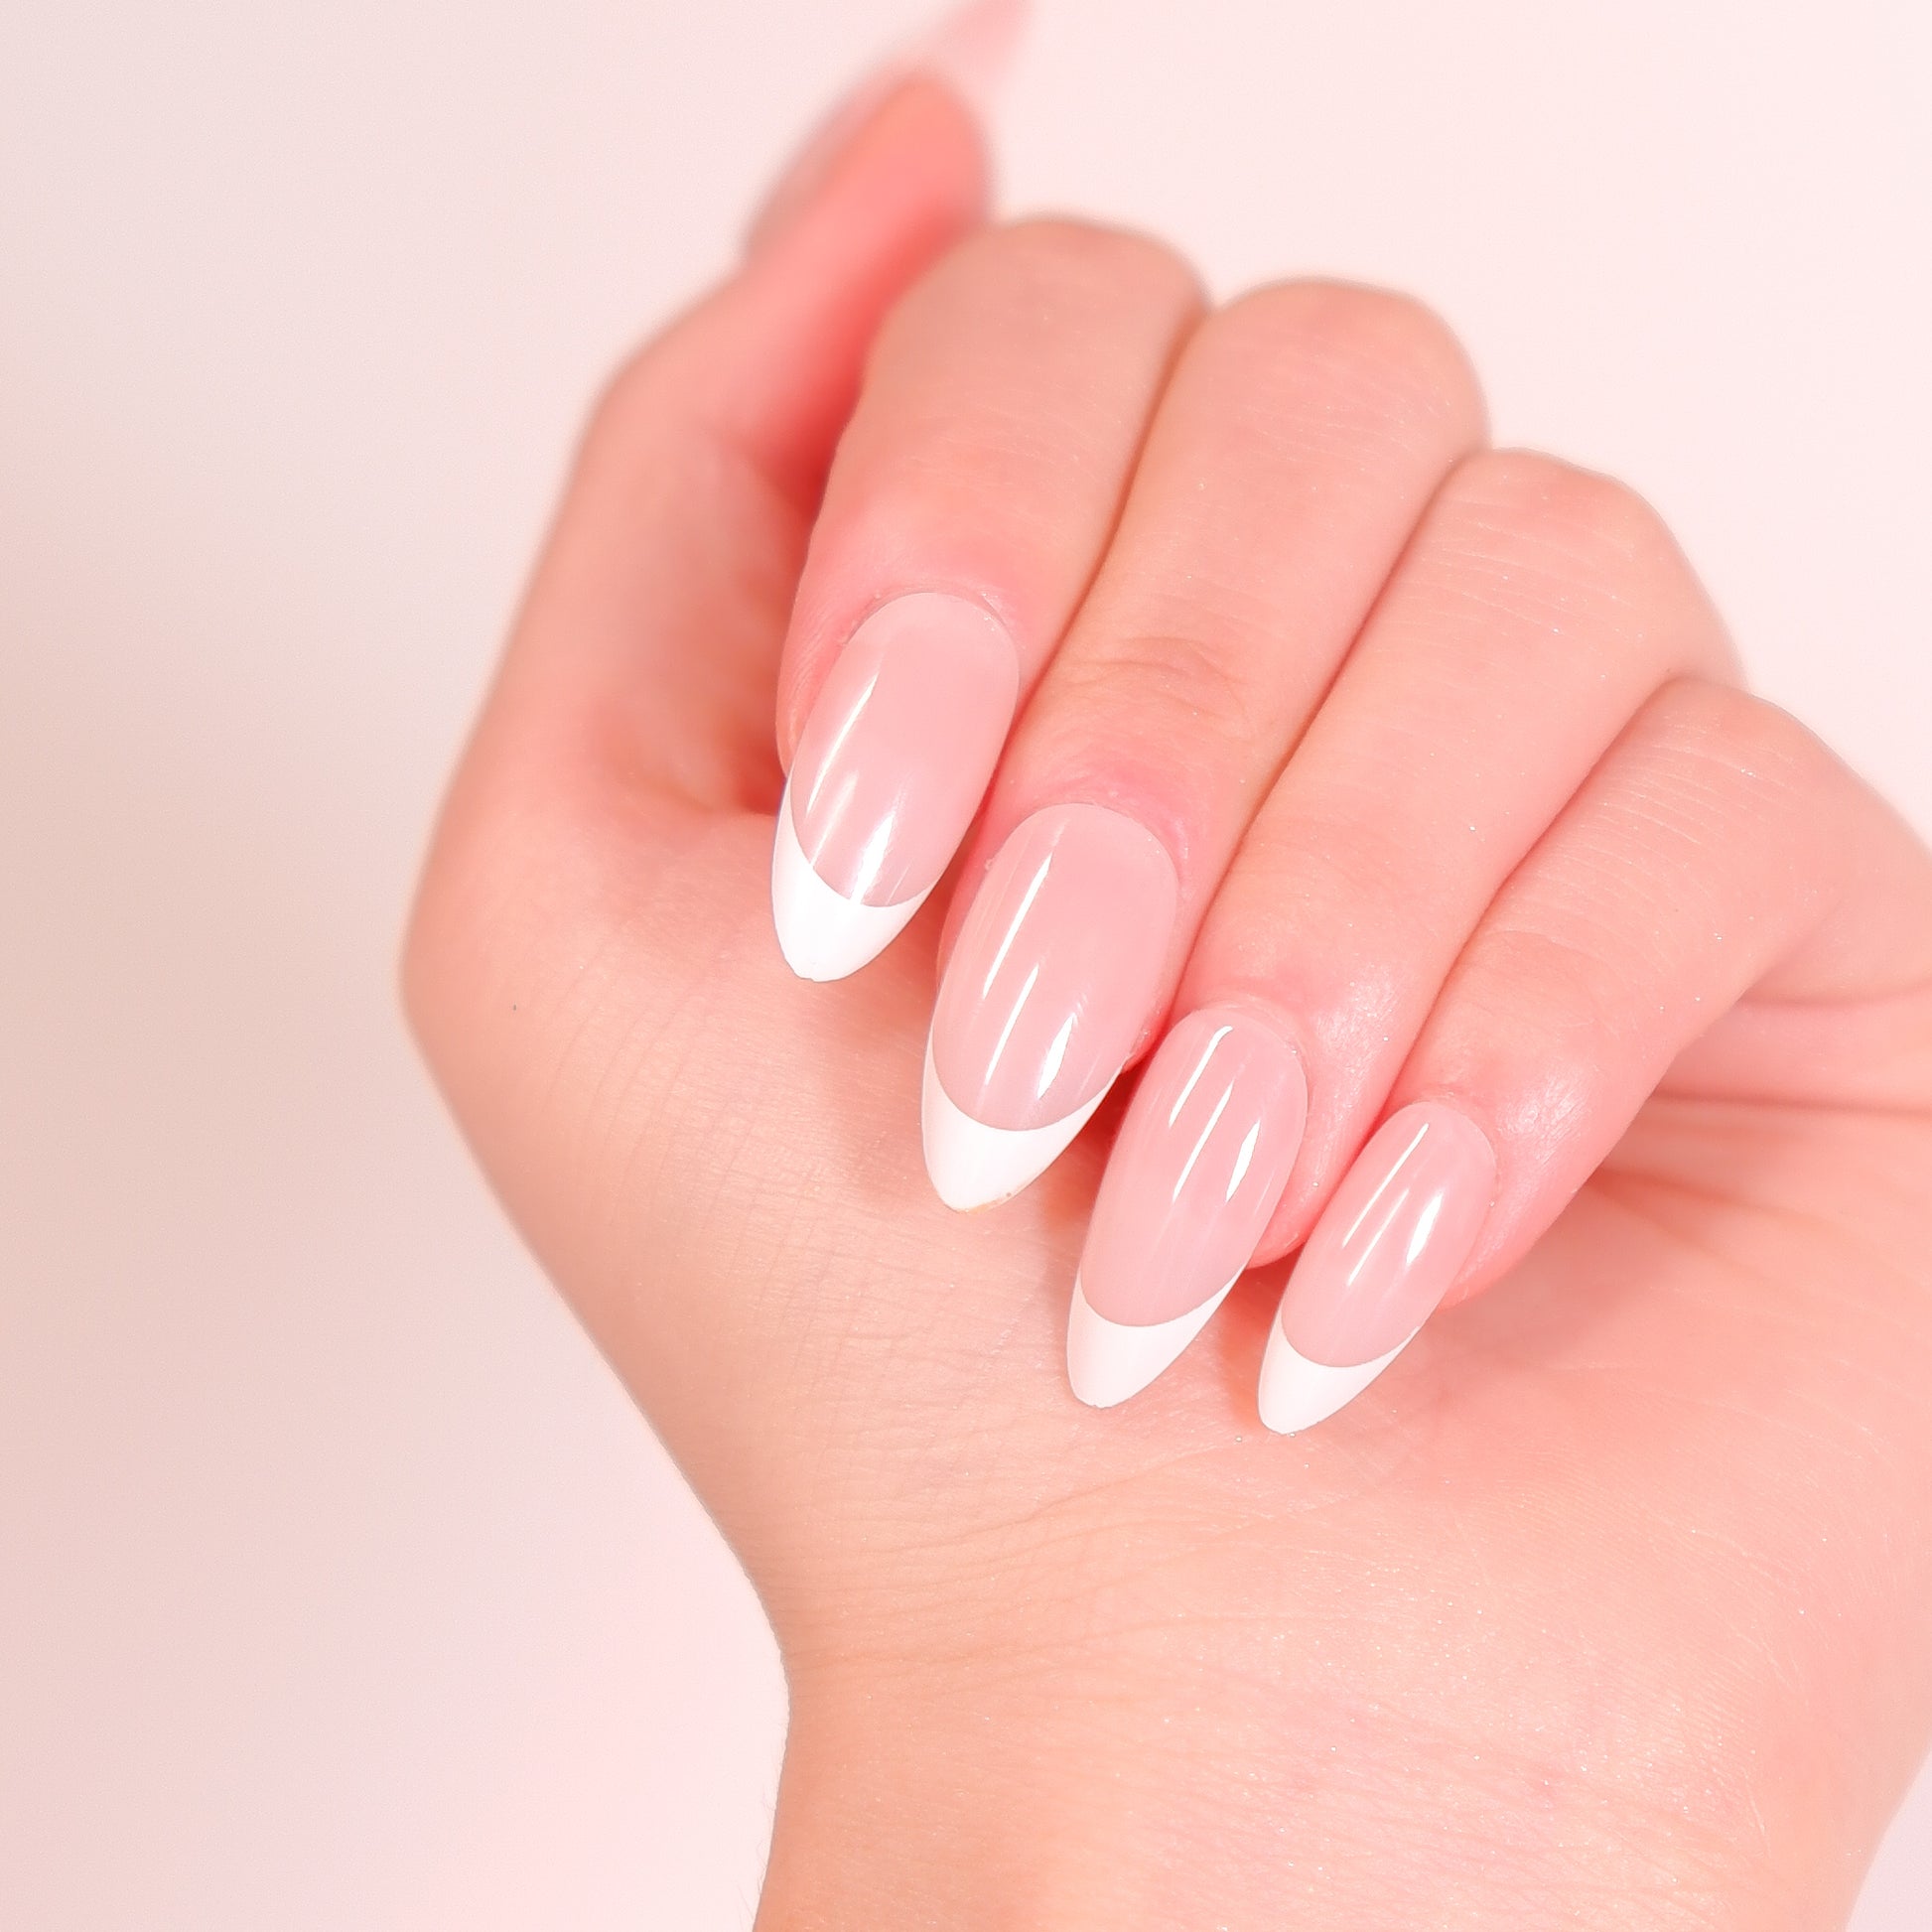 white French tip